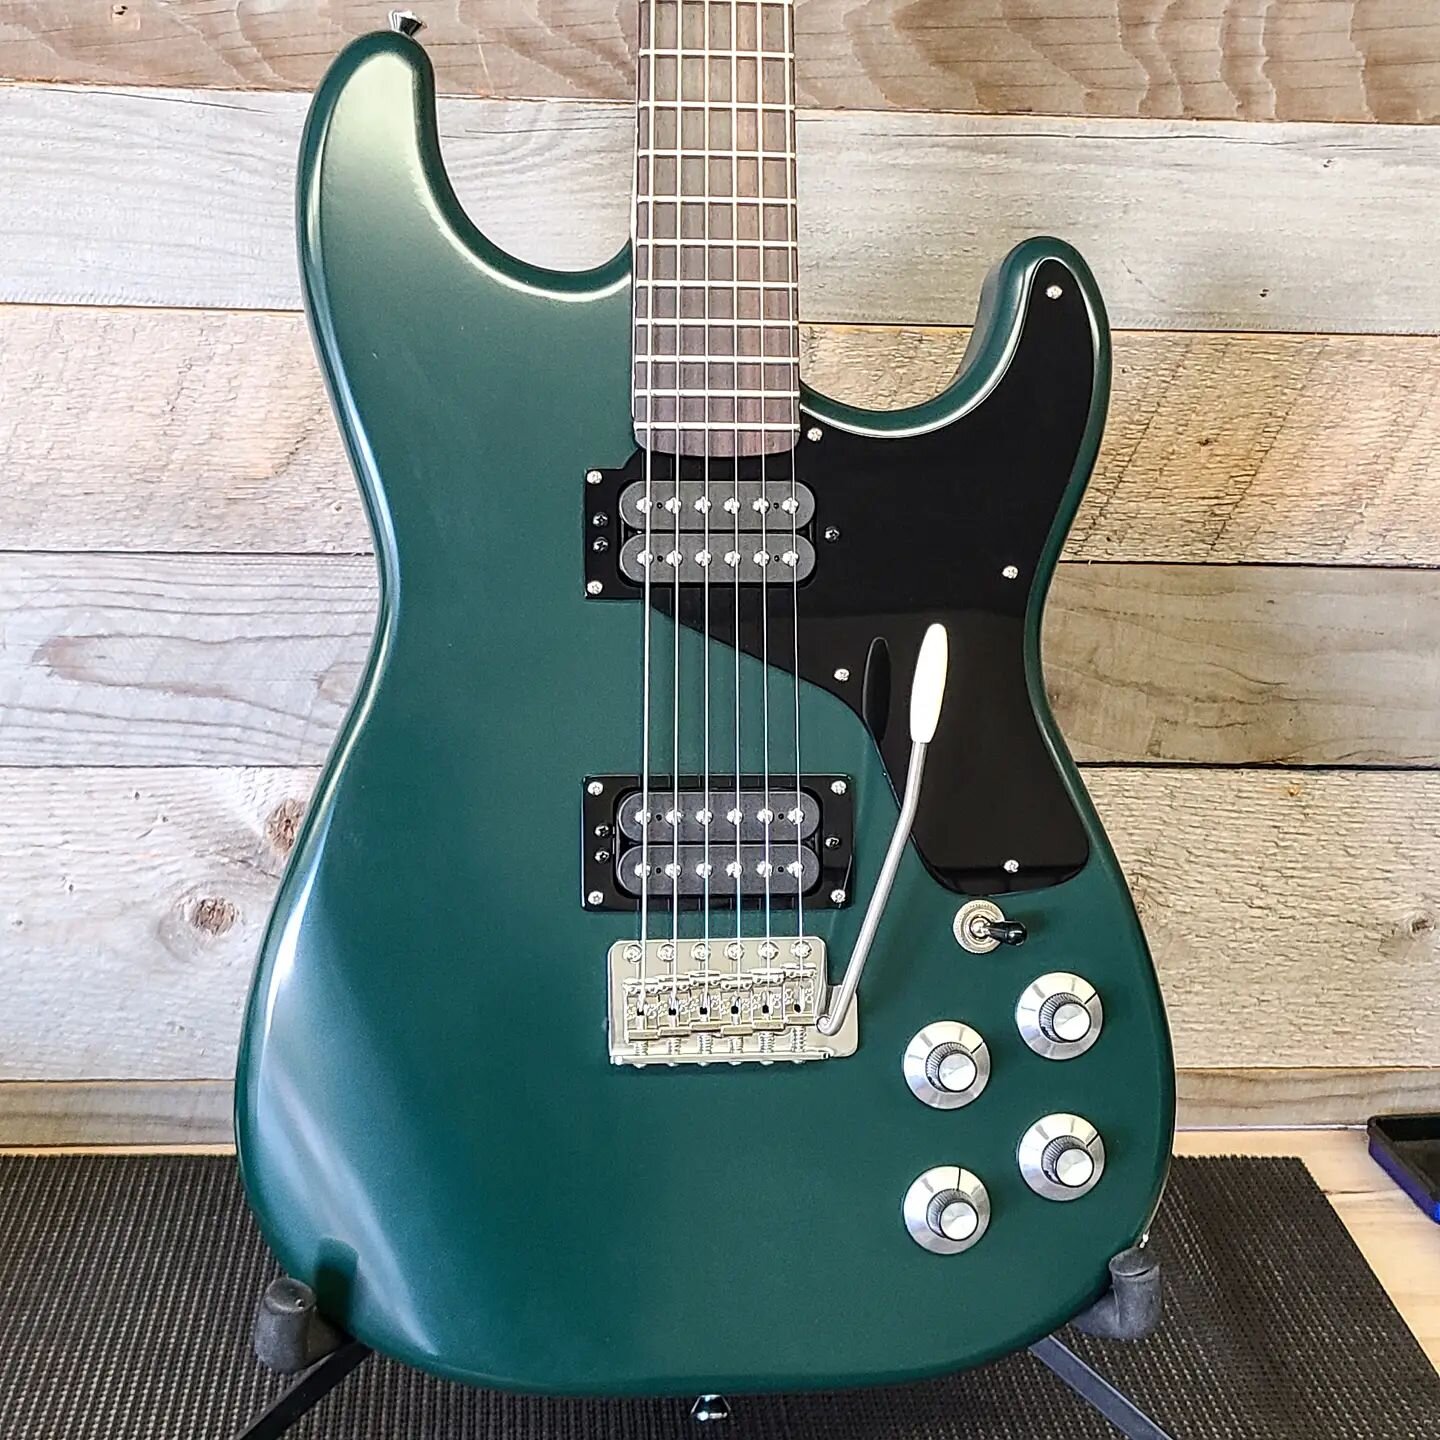 A new guitar is born. Doesn't have a model name yet. Specially made for @whisky.pete I'm really happy with how things turned out. British Racing Green and Black - The SG style control layout and pickguard with integrated pickup ring. Callaham bridge,